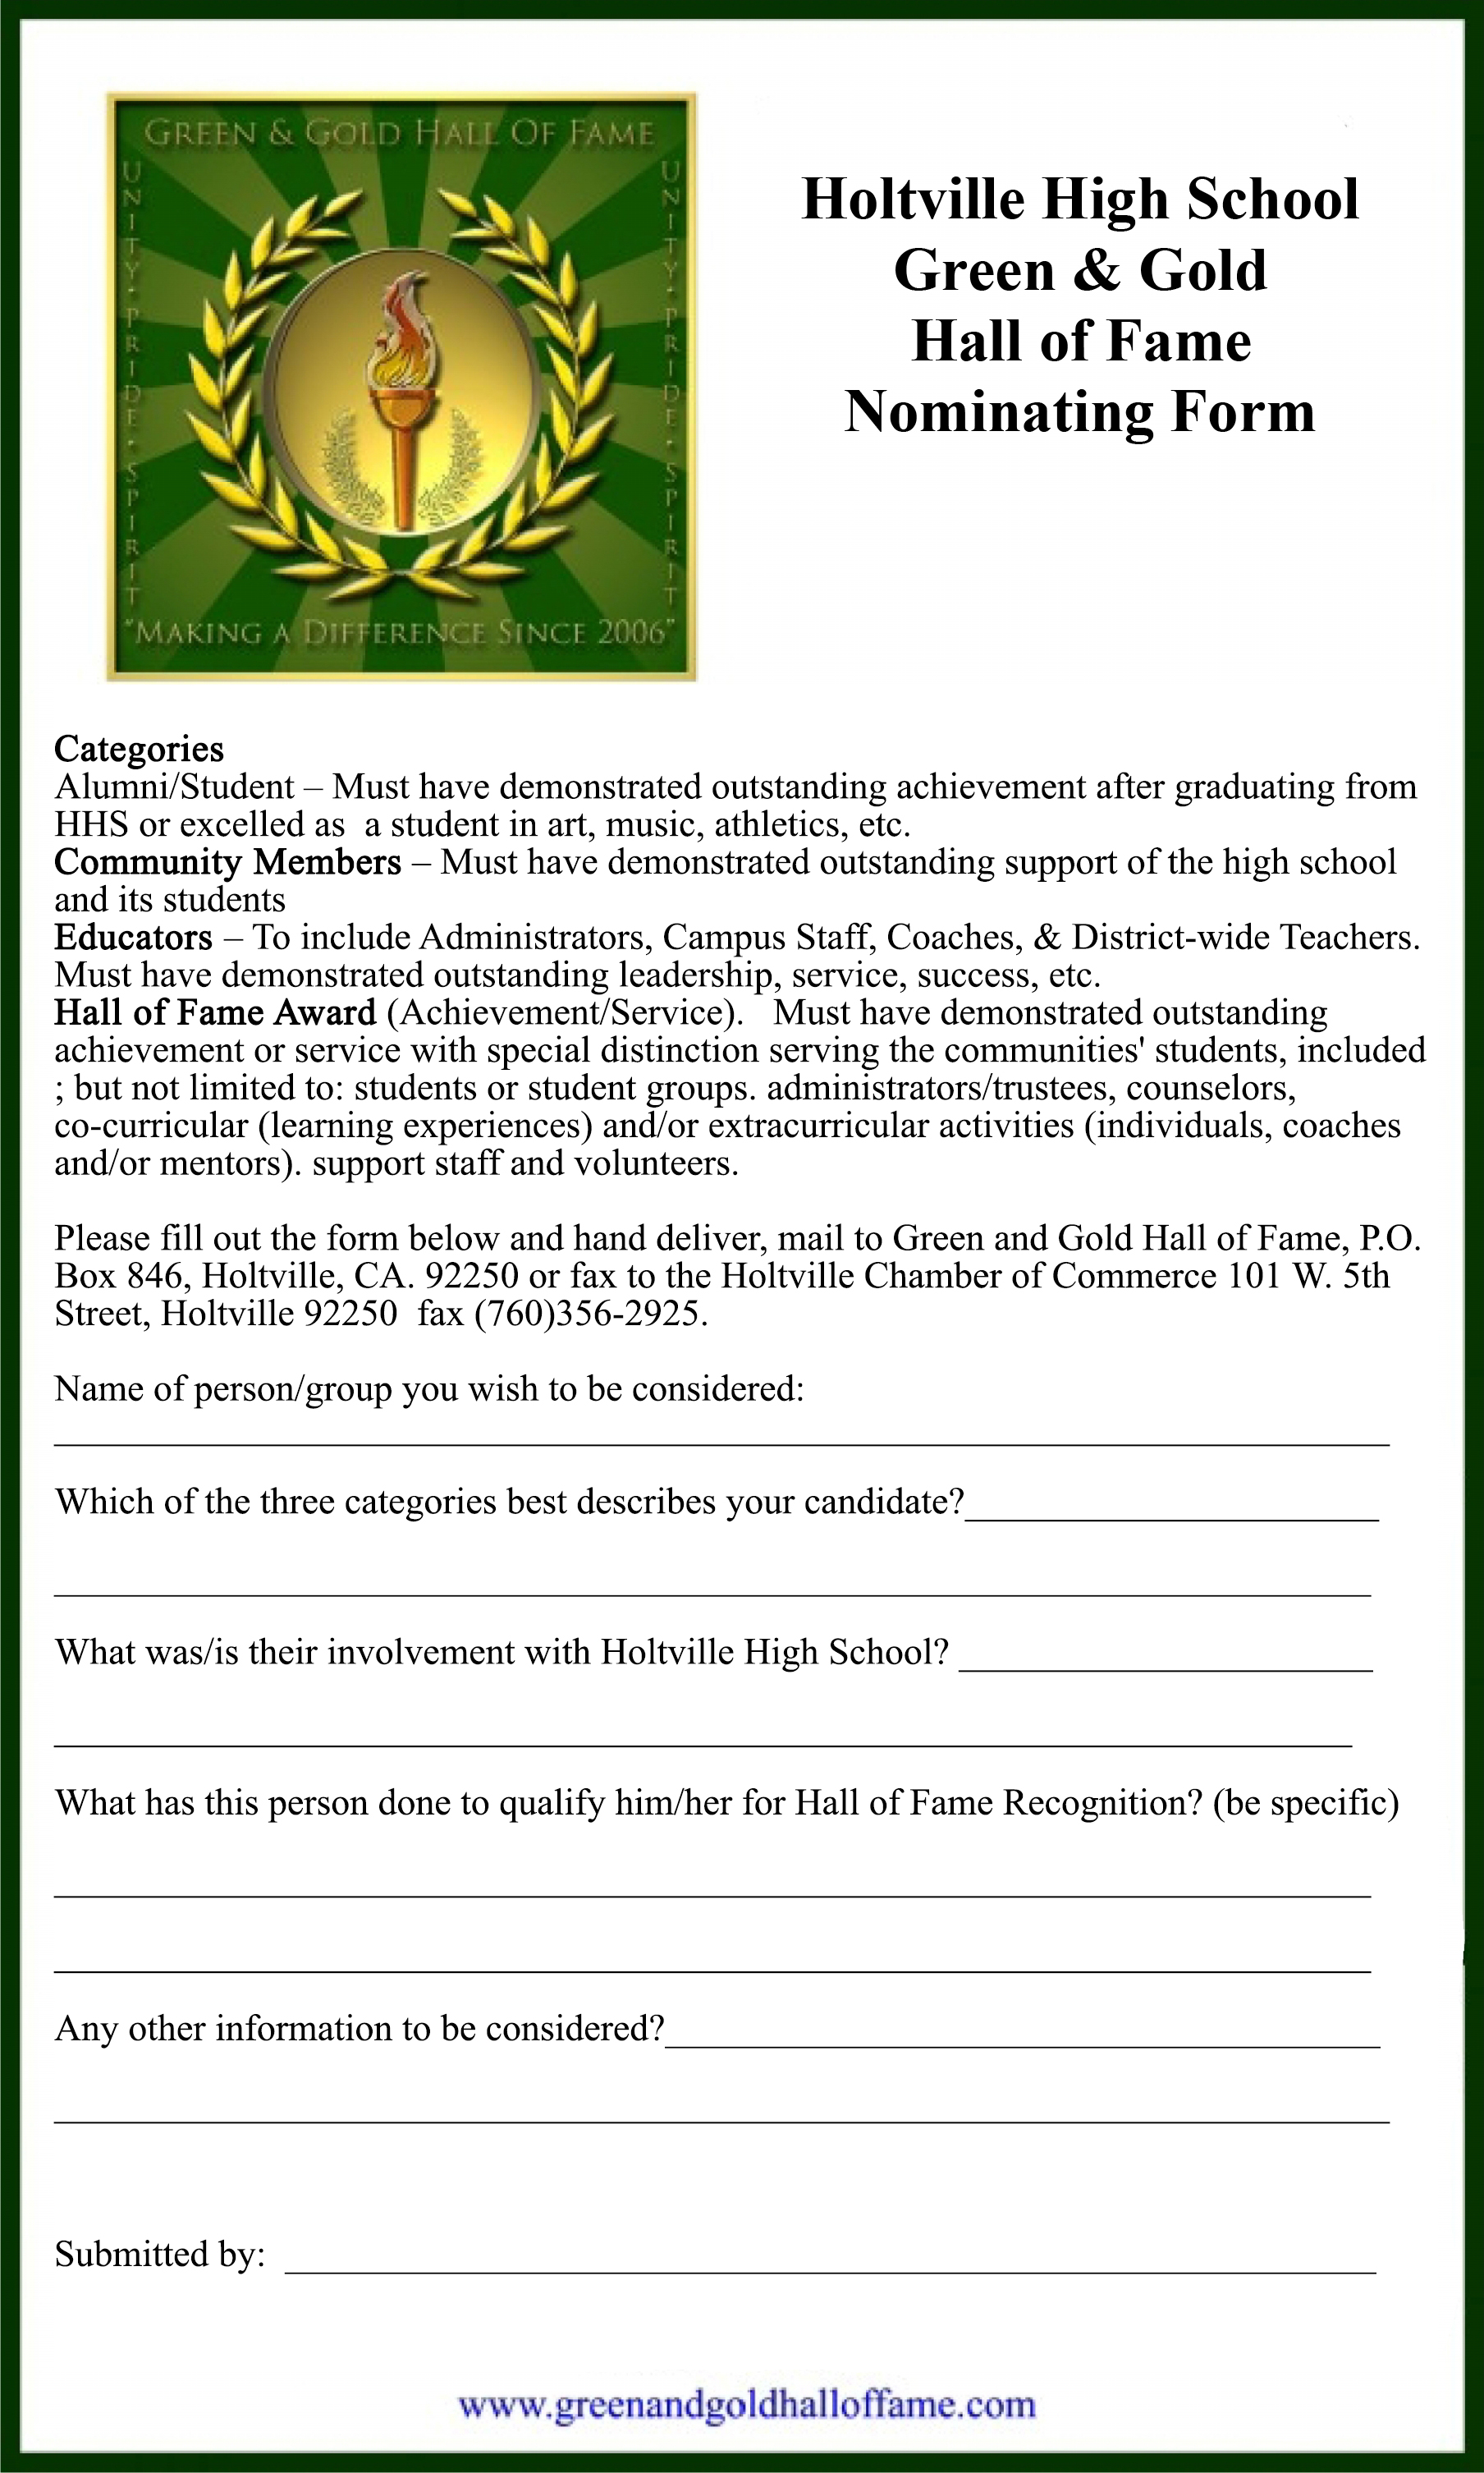 green and gold nominatiog form